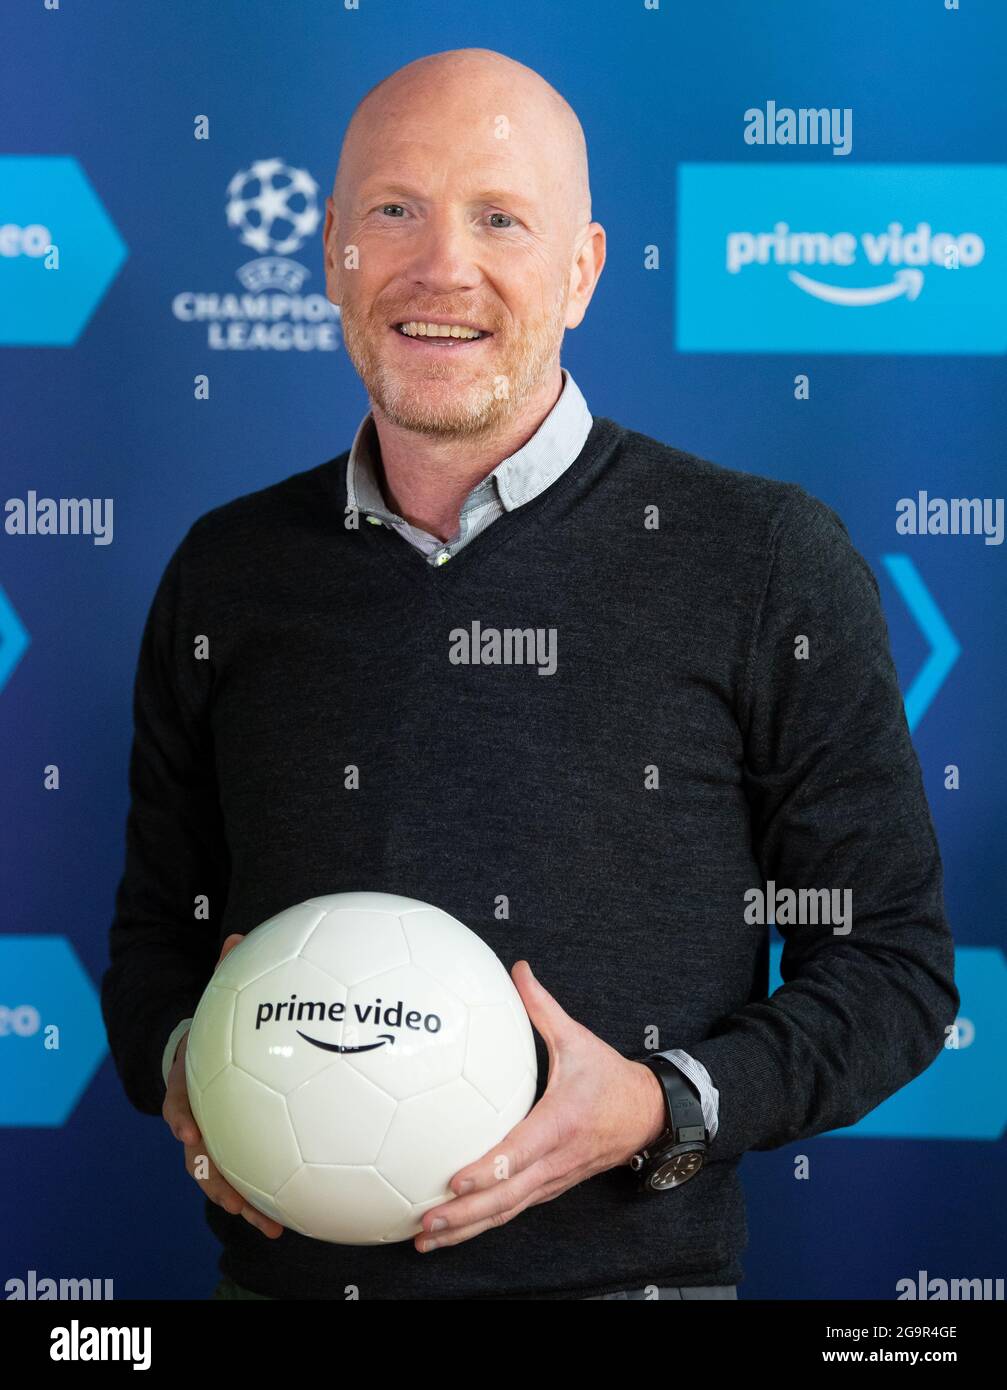 Munich, Germany. 27th July, 2021. Matthias Sammer, TV expert, takes part in a press conference of Amazon Prime Video